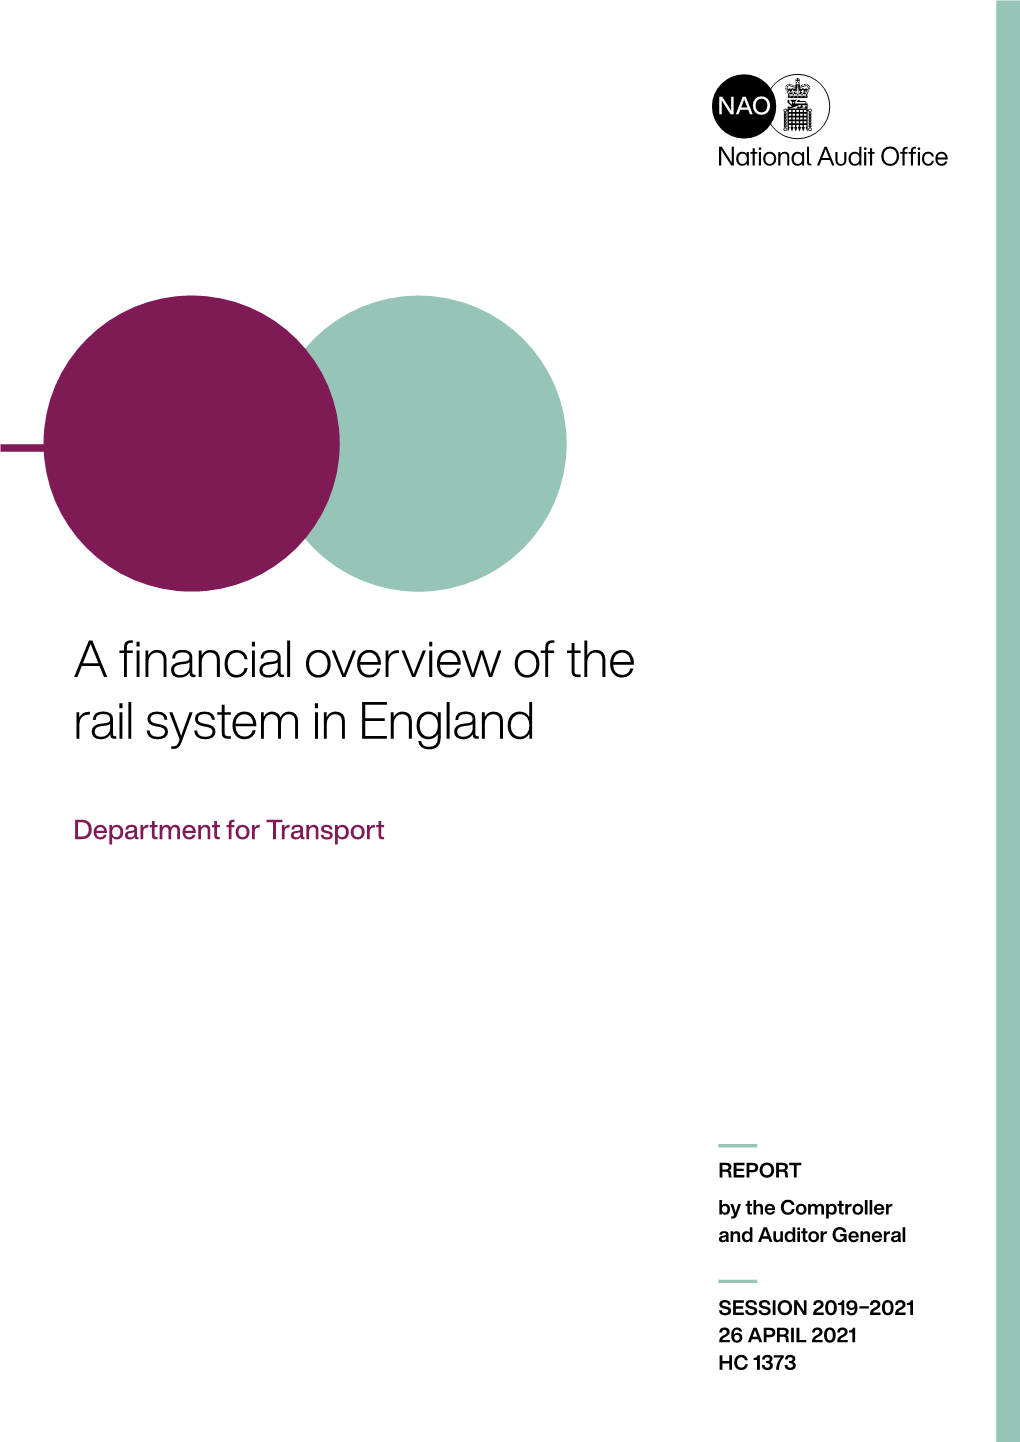 A Financial Overview of the Rail System in England